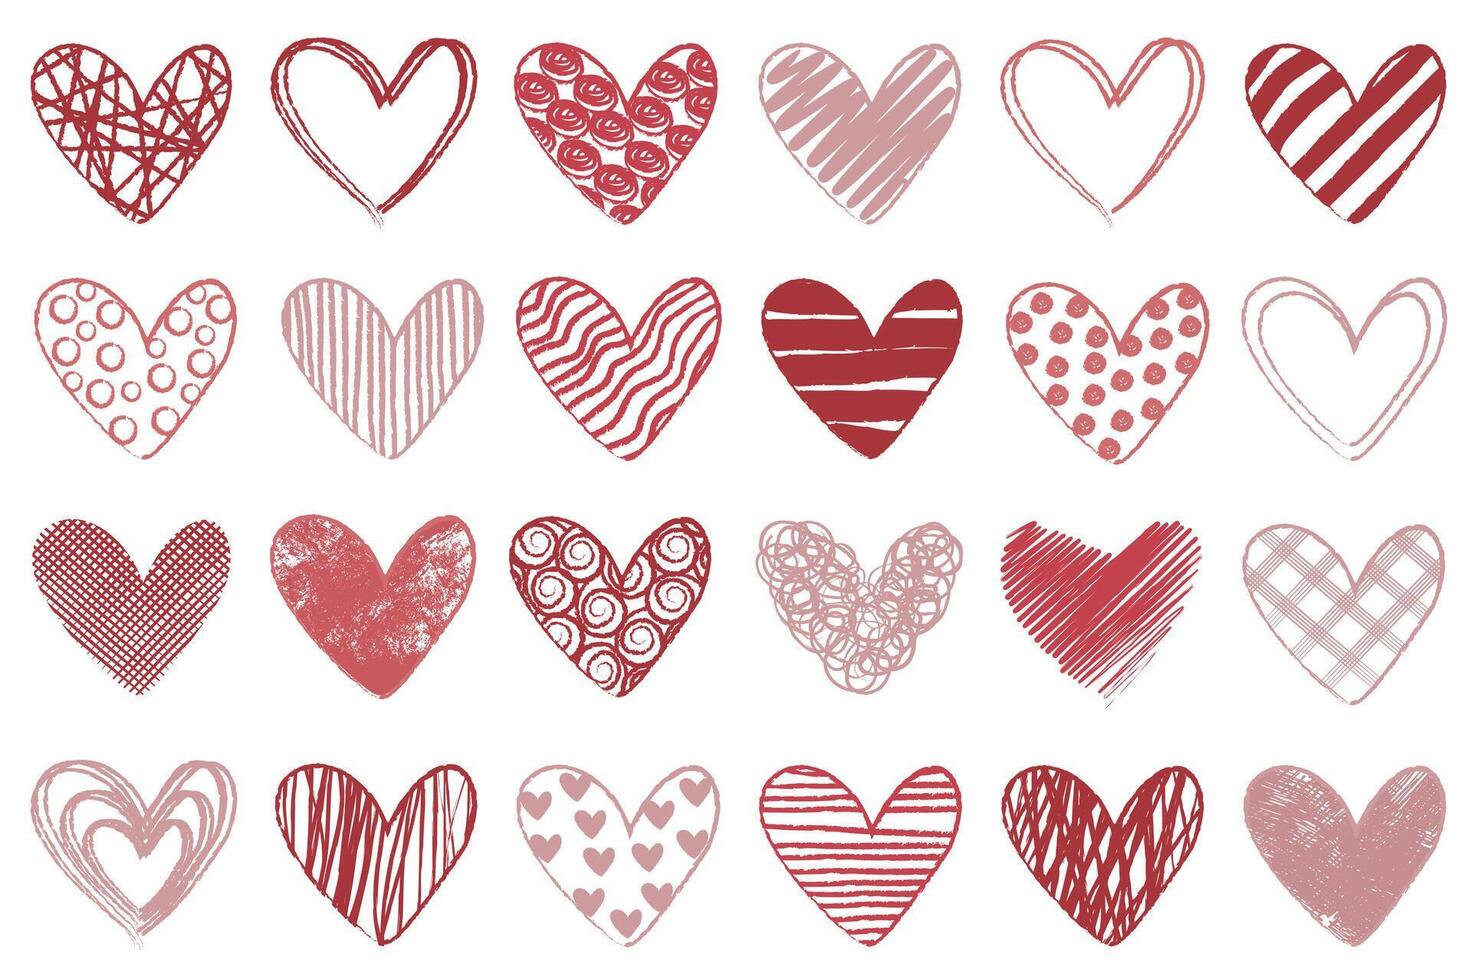 Hand drawn hearts mega set in flat design. Bundle elements of doodle simple romantic shapes with striped, lines or polka dots patterns, grunge texture. Vector illustration isolated graphic objects